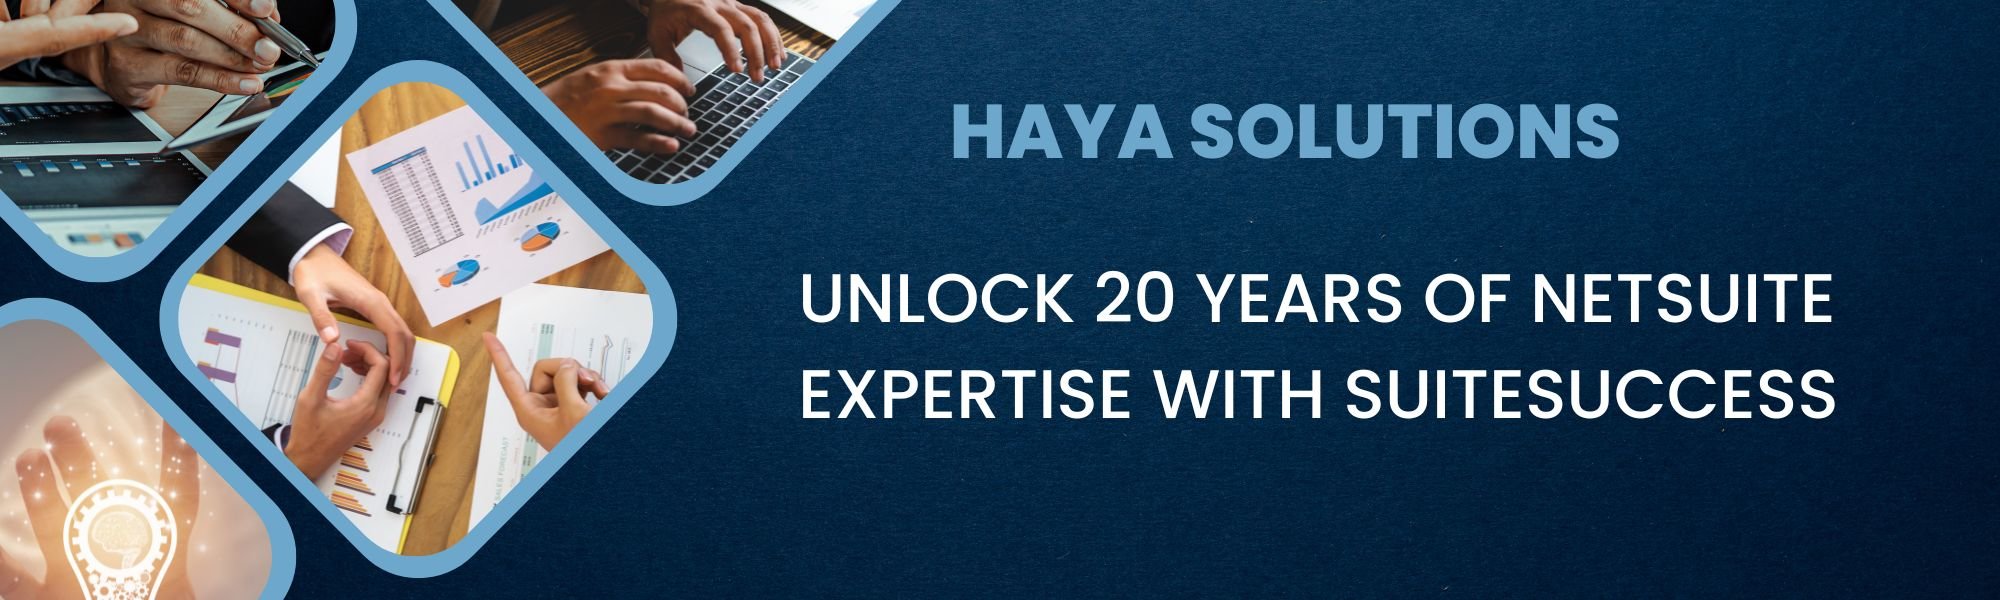 Unlock 20 Years of NetSuite Expertise with SuiteSuccess